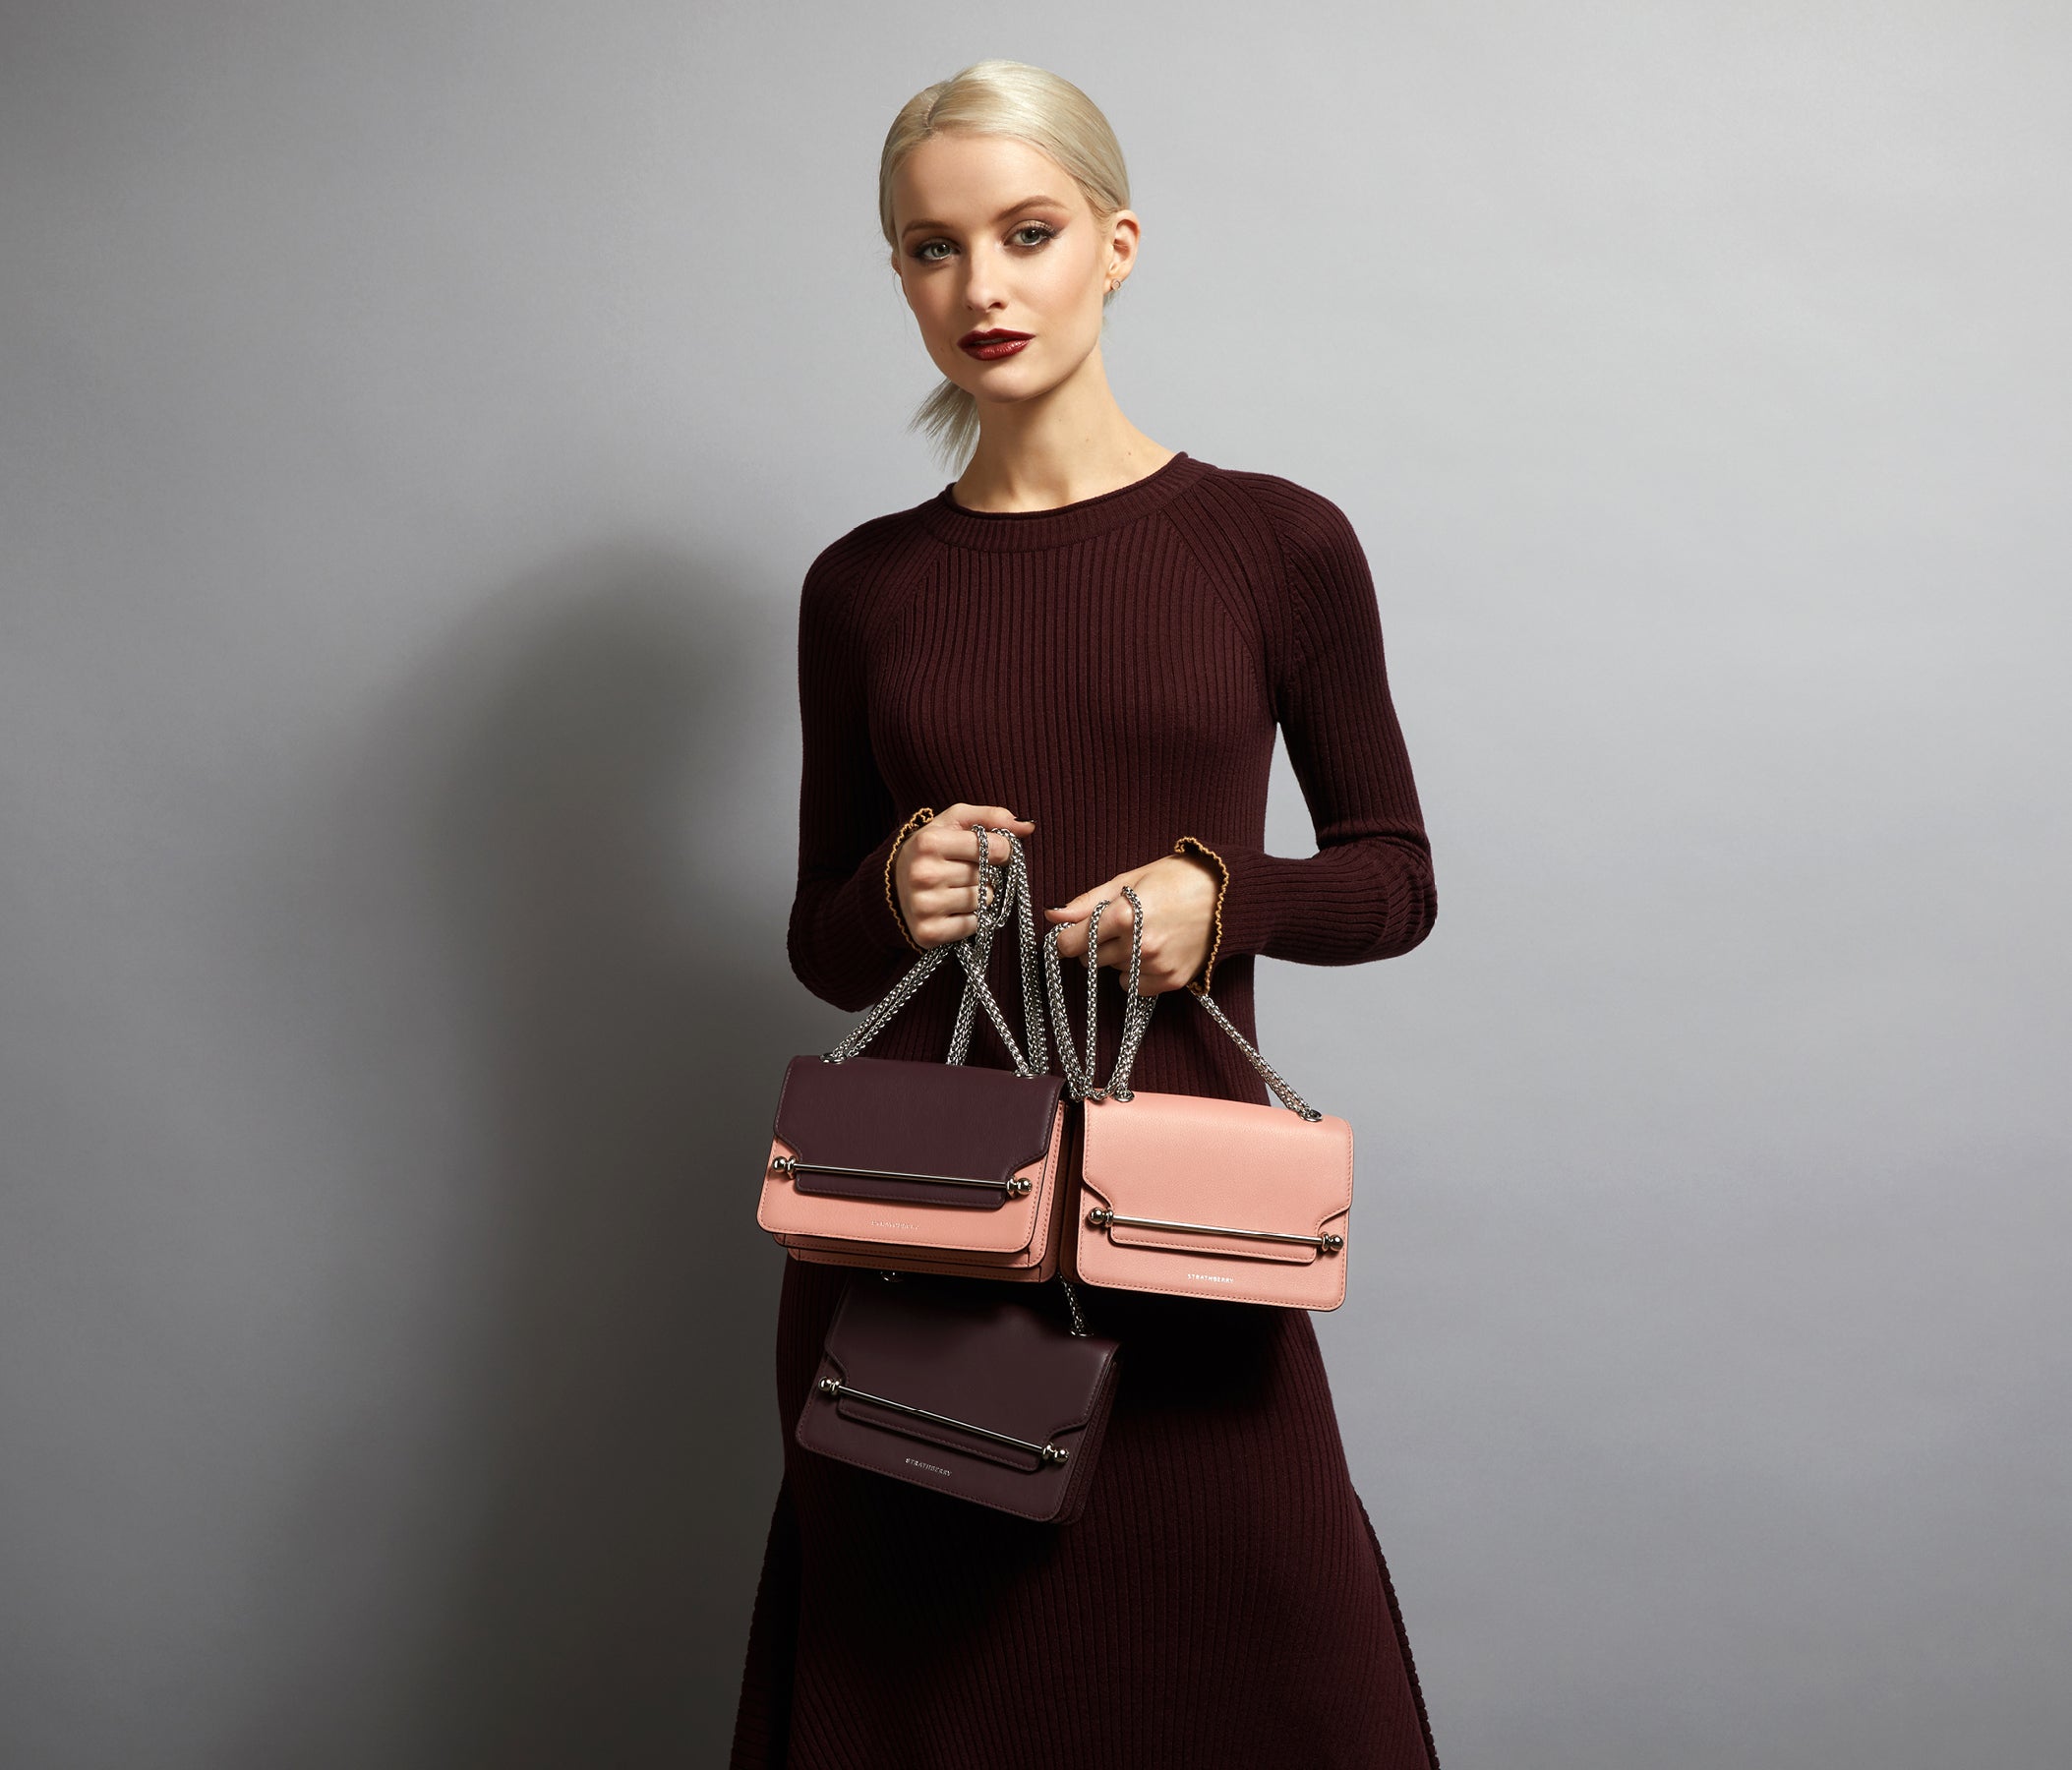 Strathberry launches first non-leather collection with Tara Swennen